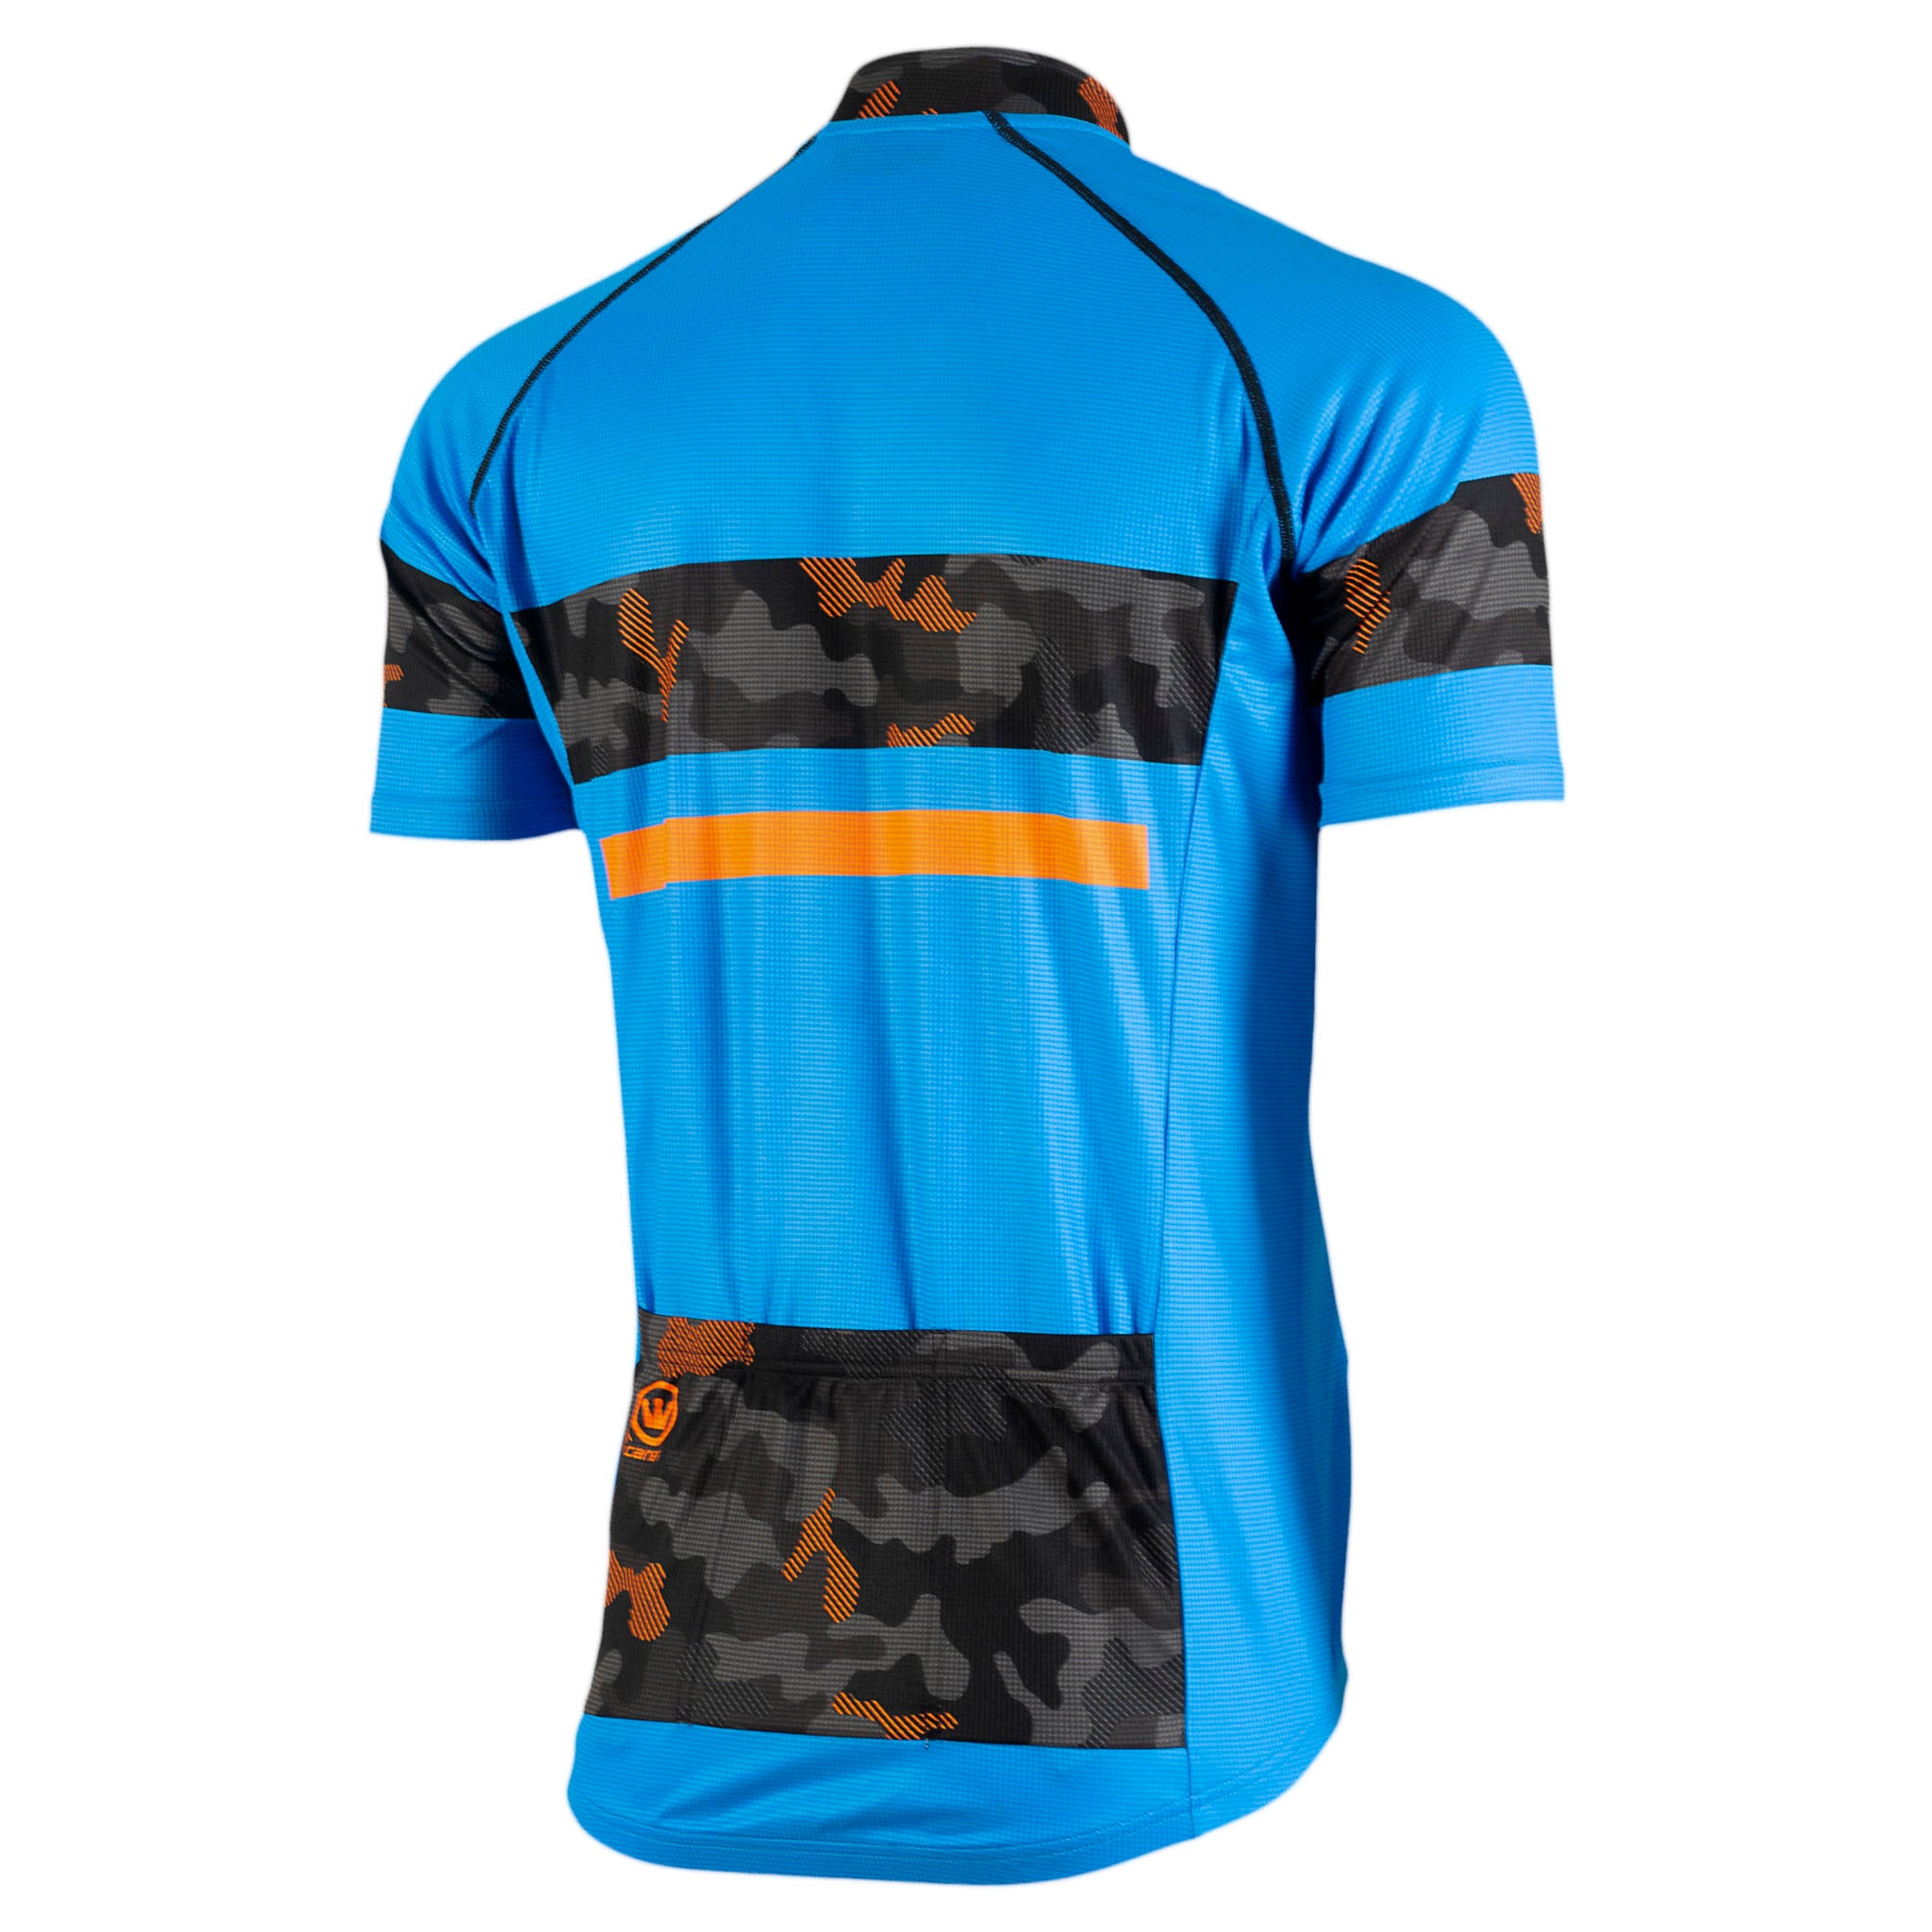 Men's Core Cycling Jersey - Performance Riding